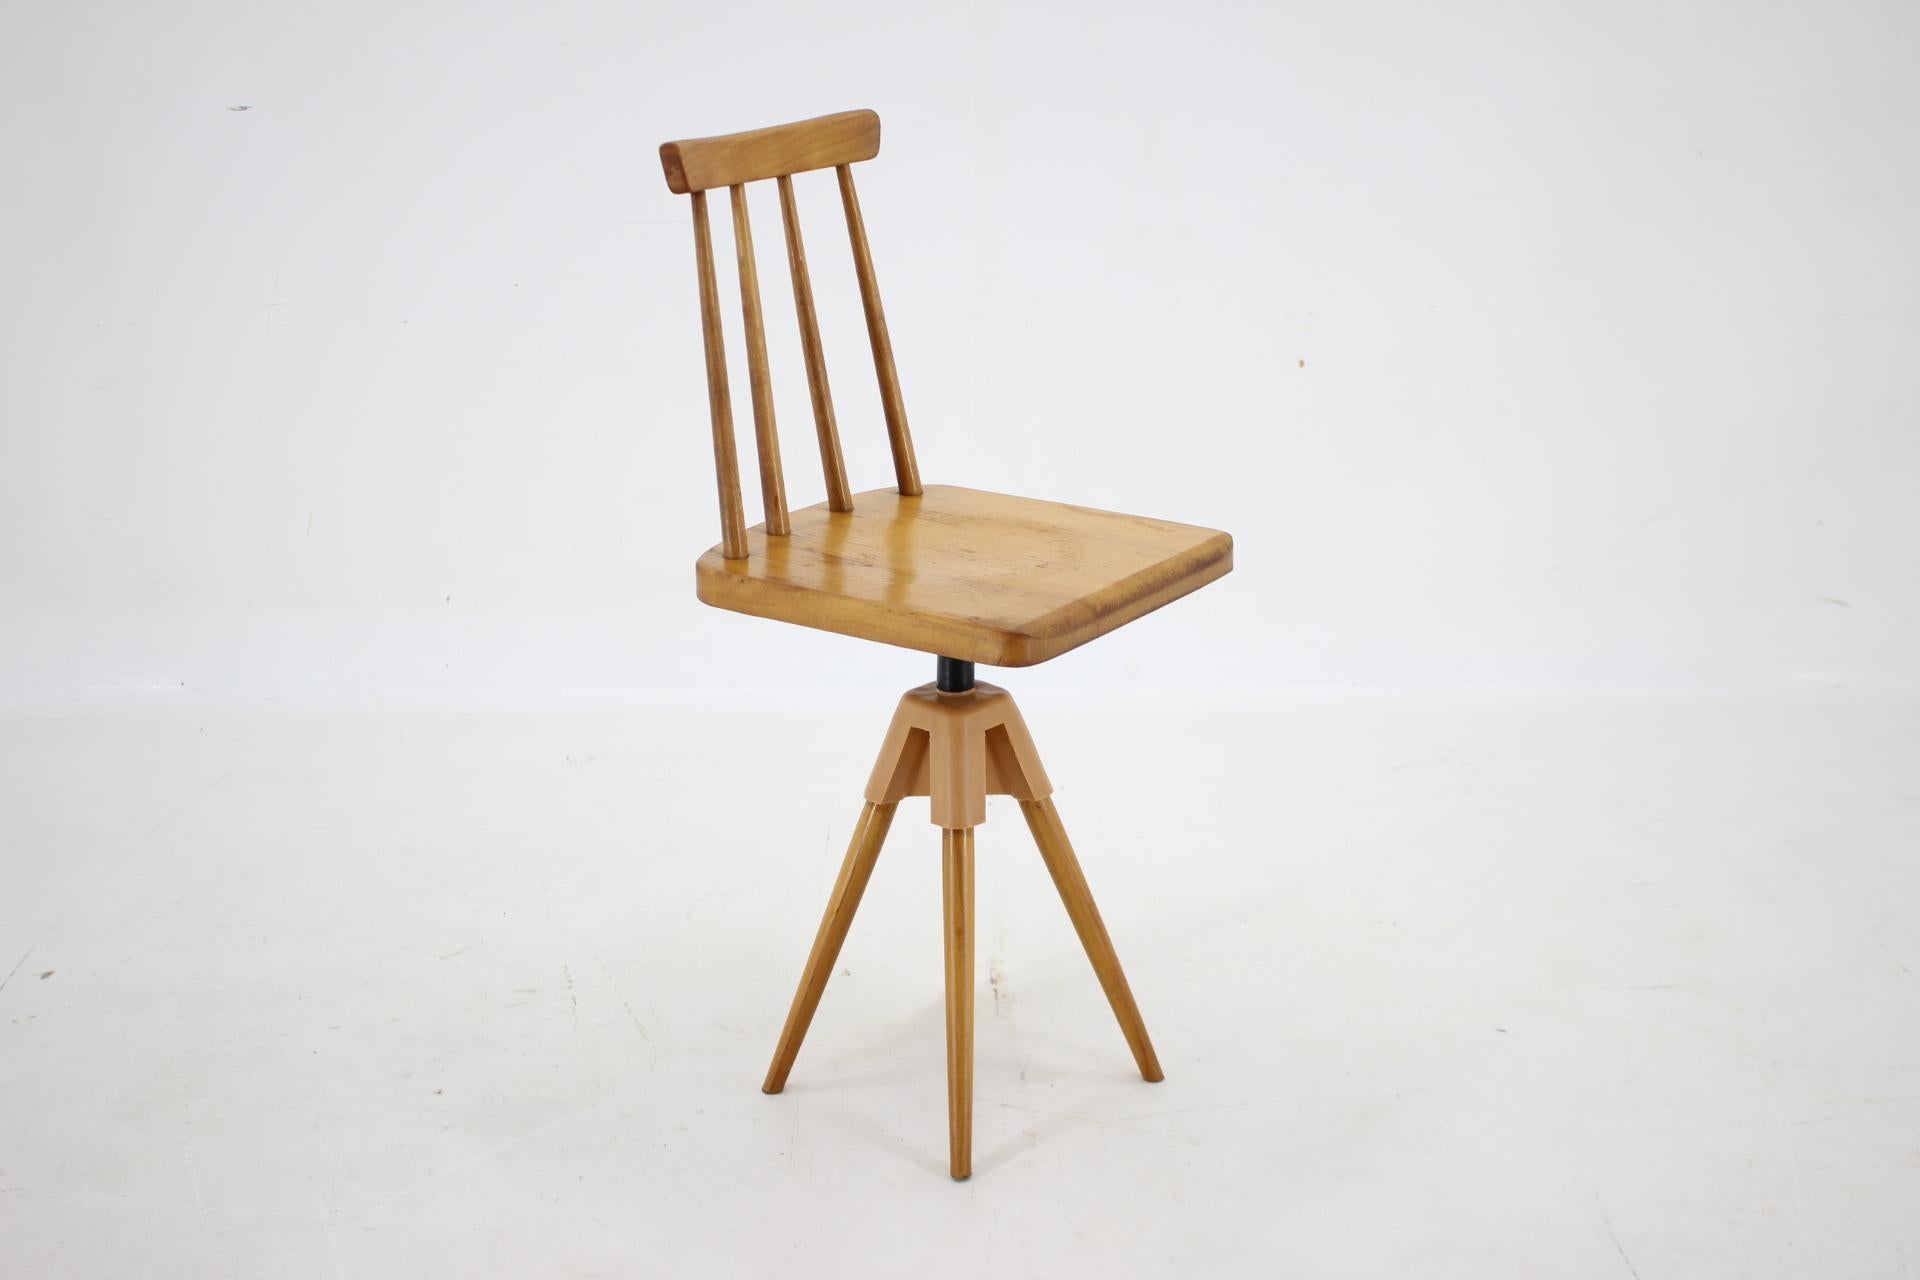 - Good original condition with minor signs of use  
- Height of seat 49 cm